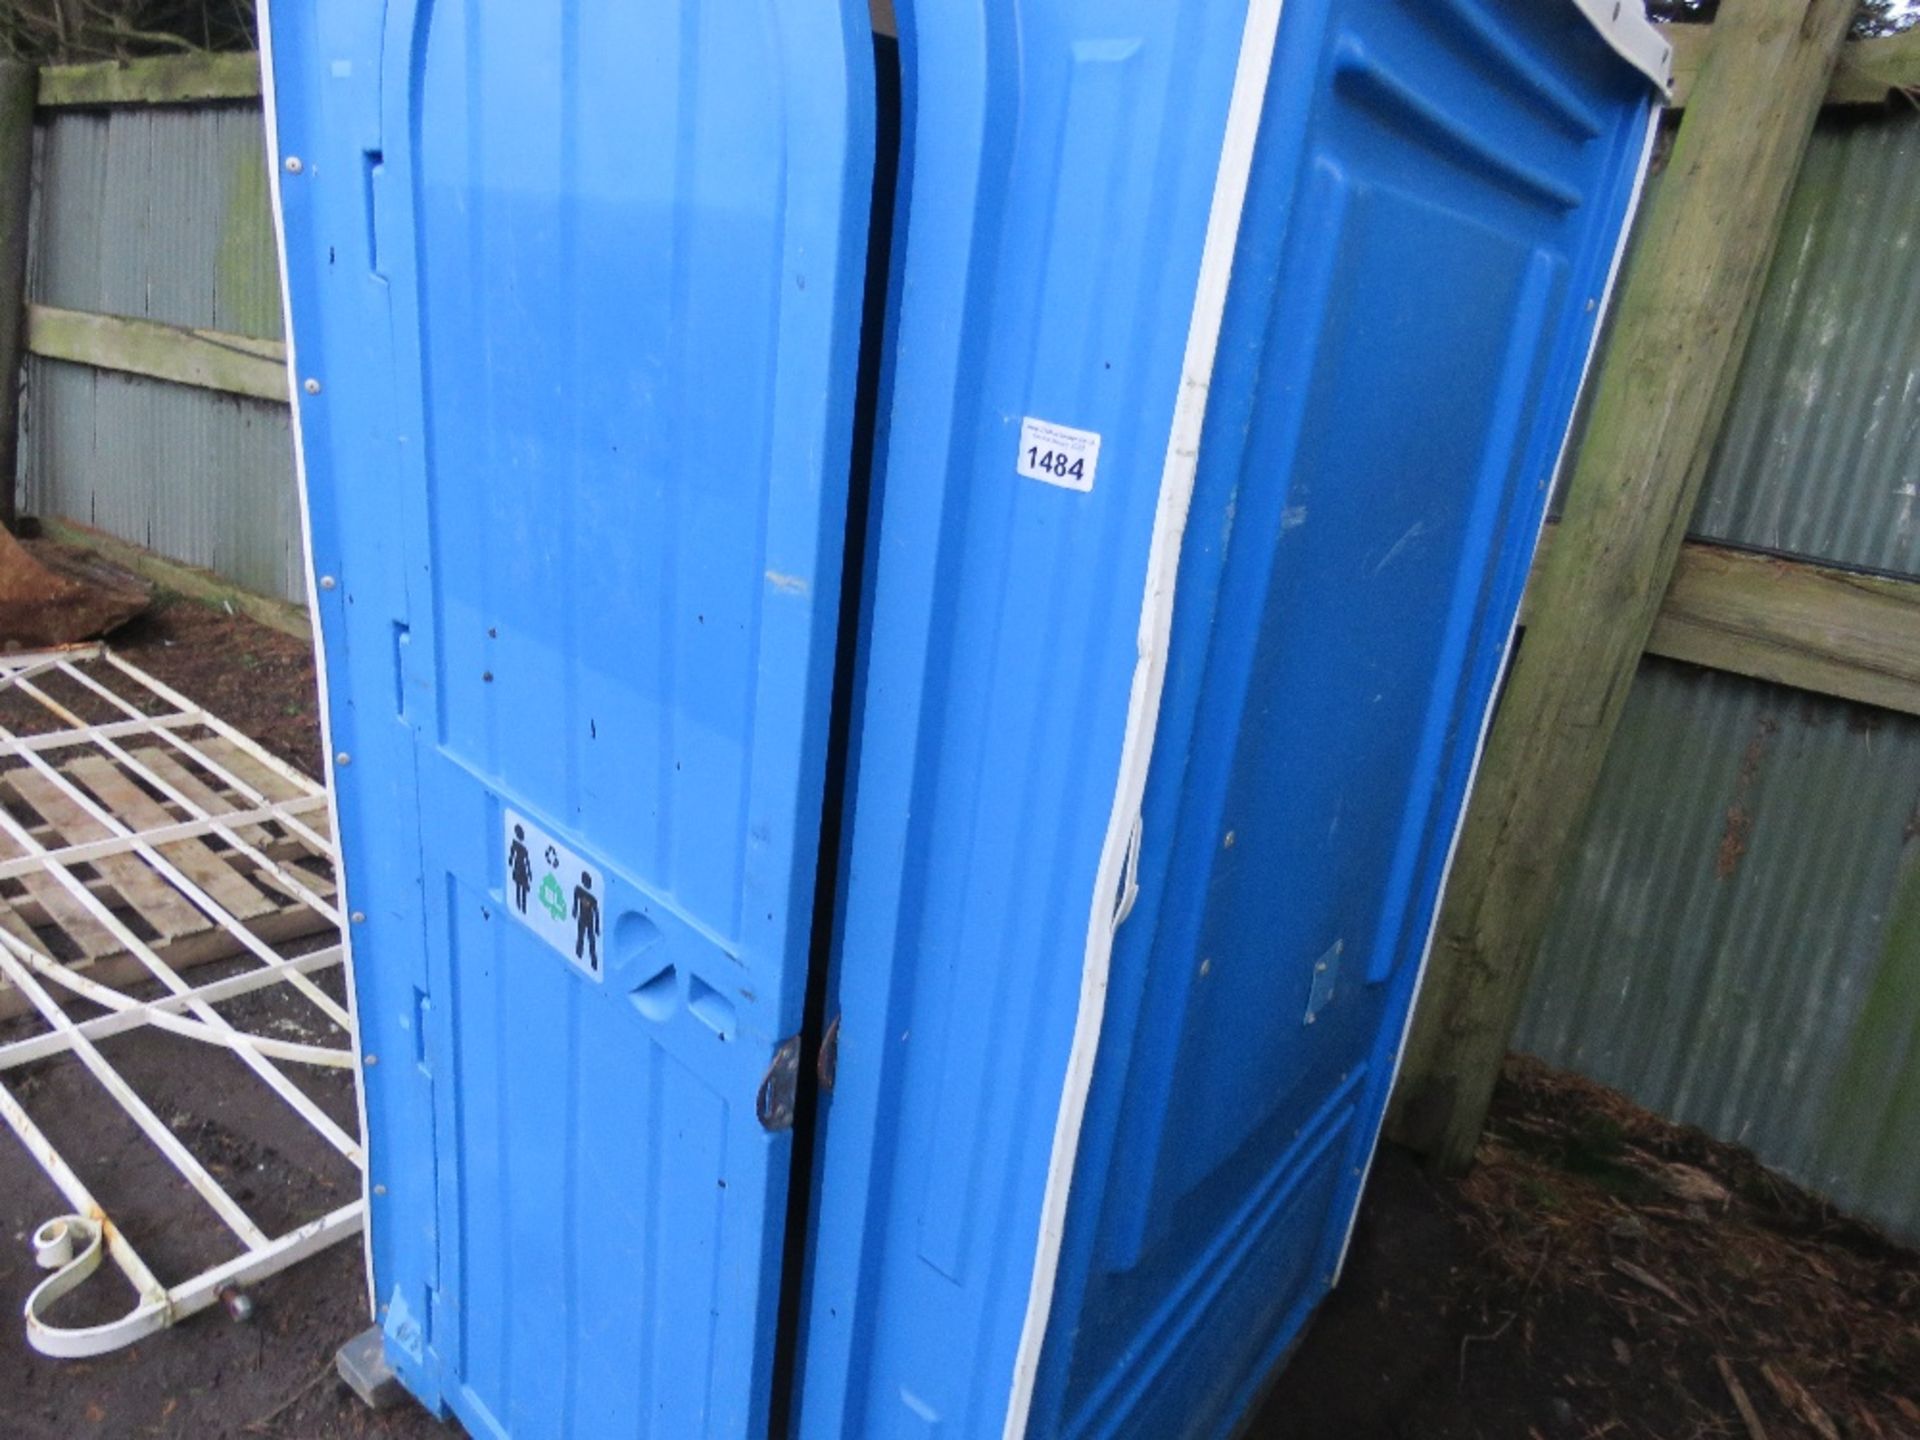 PORTABLE SITE / EVENTS TOILET, DIRECT FROM LOCAL COMPANY AS PART OF THEIR FLEET RENEWAL.